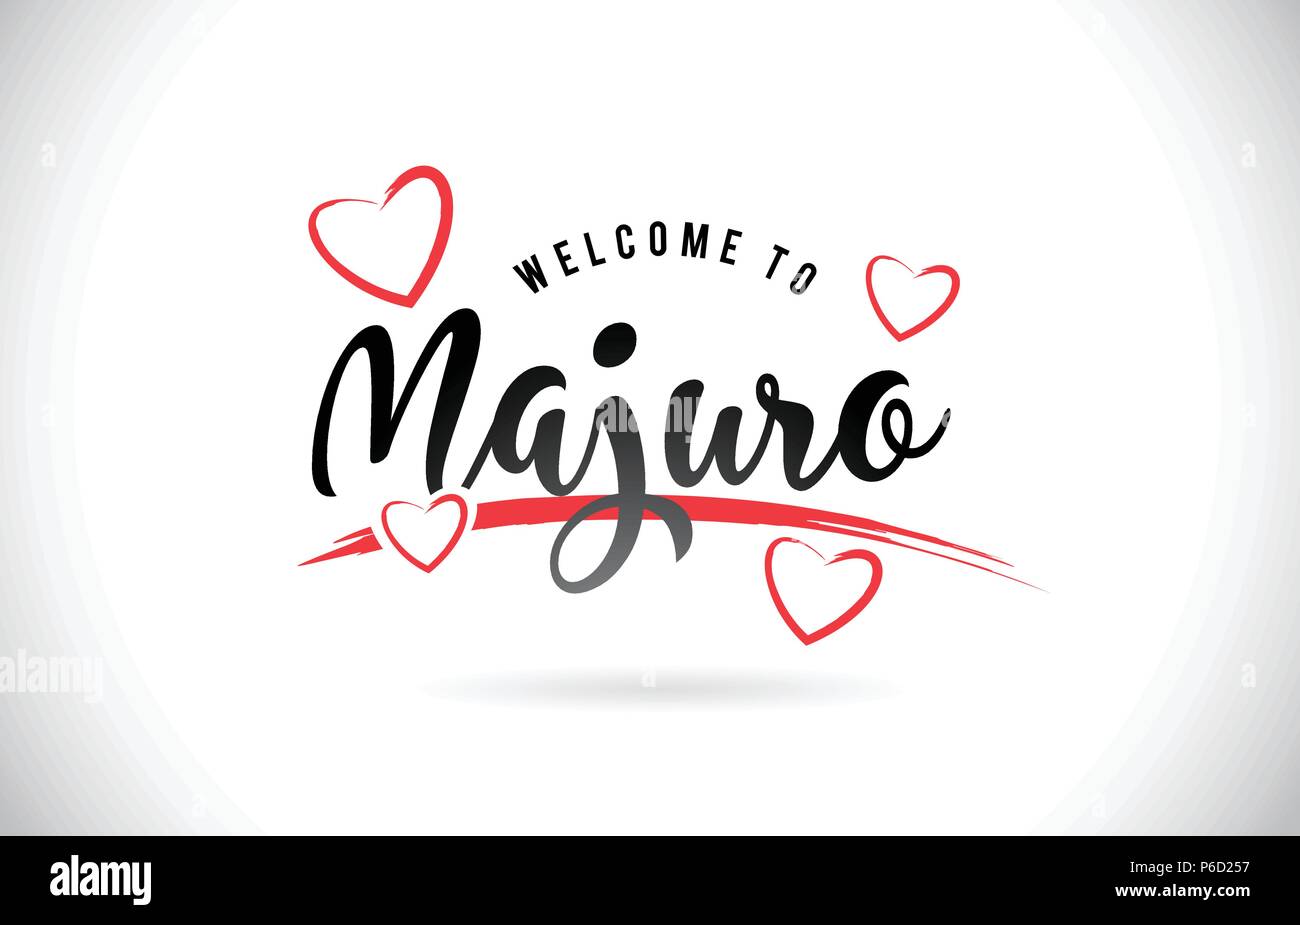 Majuro Welcome To Word Text with Handwritten Font and Red Love Hearts Vector Image Illustration Eps. Stock Vector